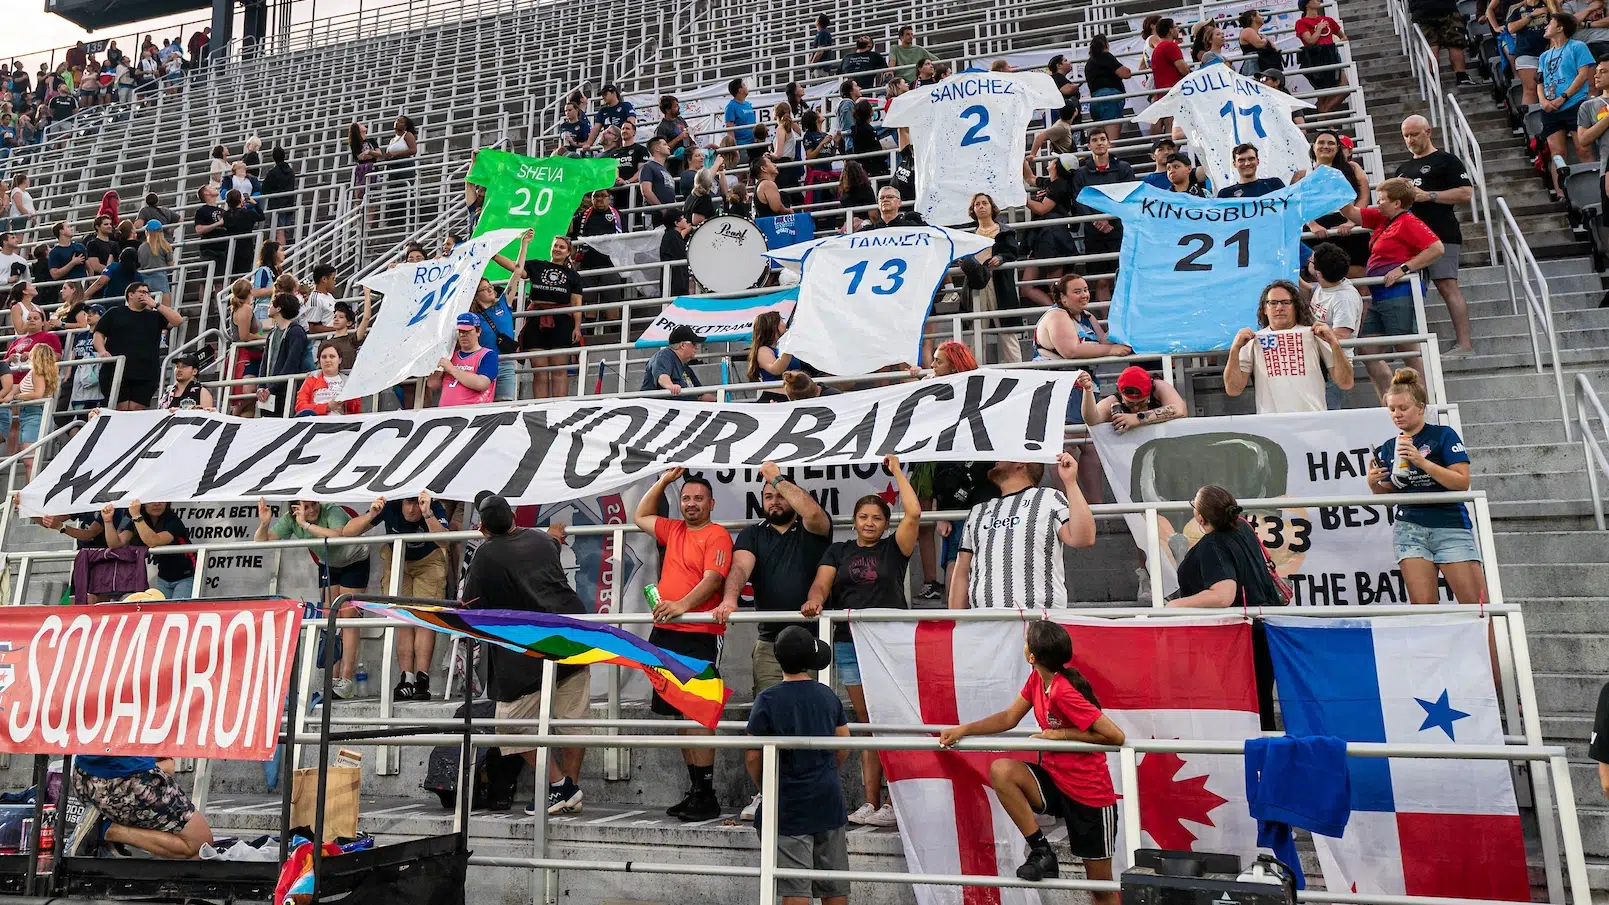 Fans hold up giant posters of jerseys for six players headed to the World Cup. A banner reading "We've Got Your Back" is held up by fans in the first row.